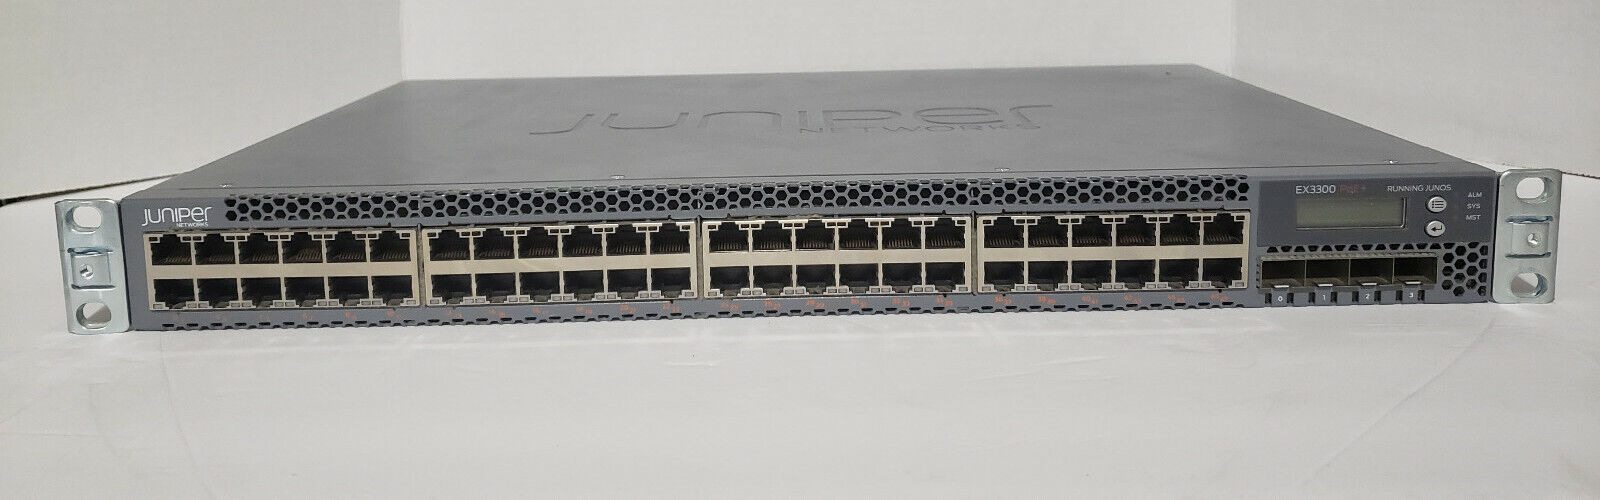 Juniper EX3300-48P 48 Port PoE+ Gigabit Switch - With Power Cord and Rack Ears